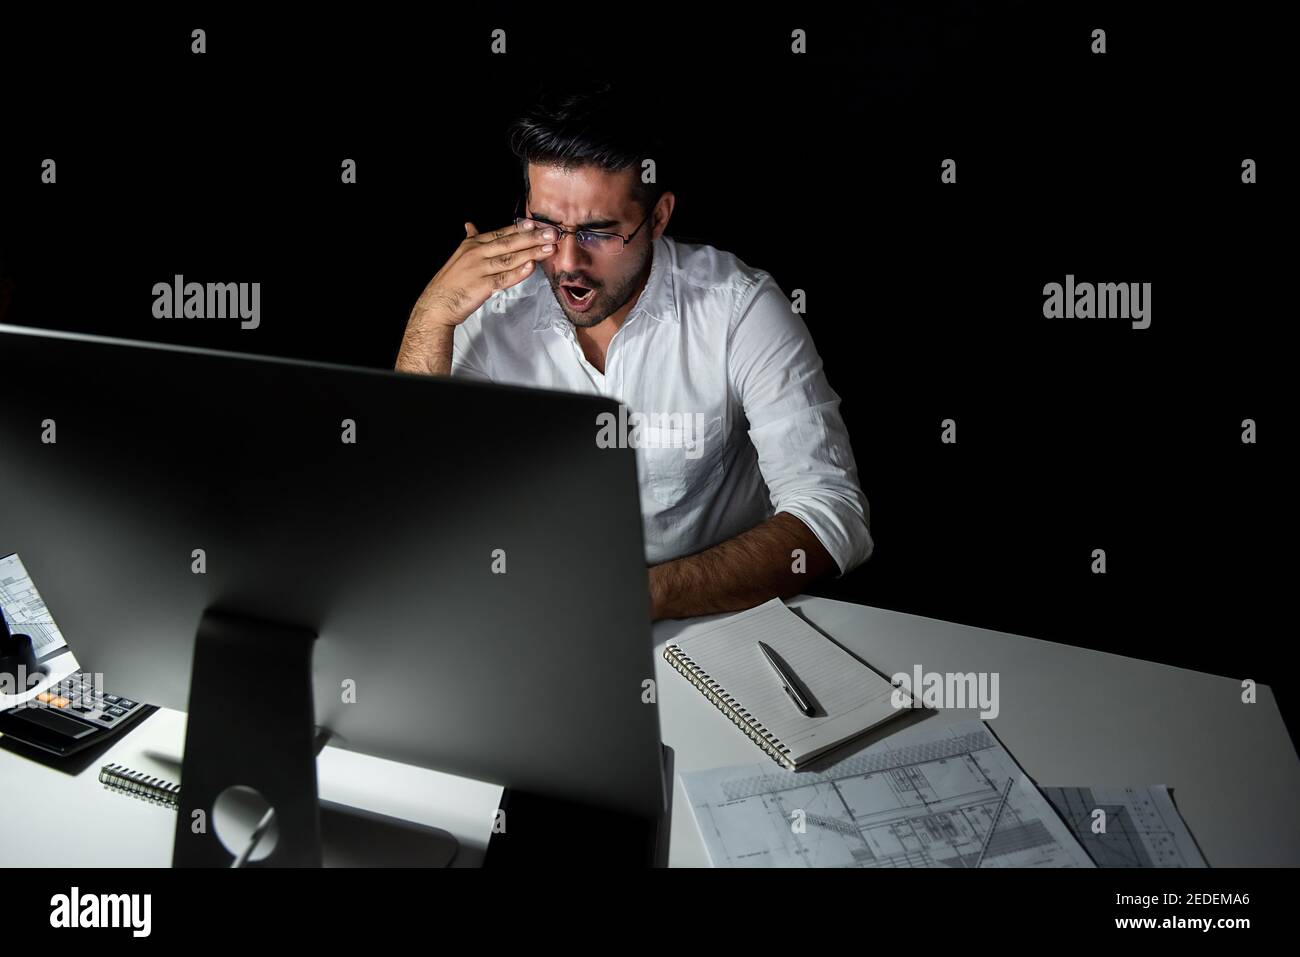 Tired fatigued Asian businessman feeling sleepy and yawning while working night shift in front of computer Stock Photo